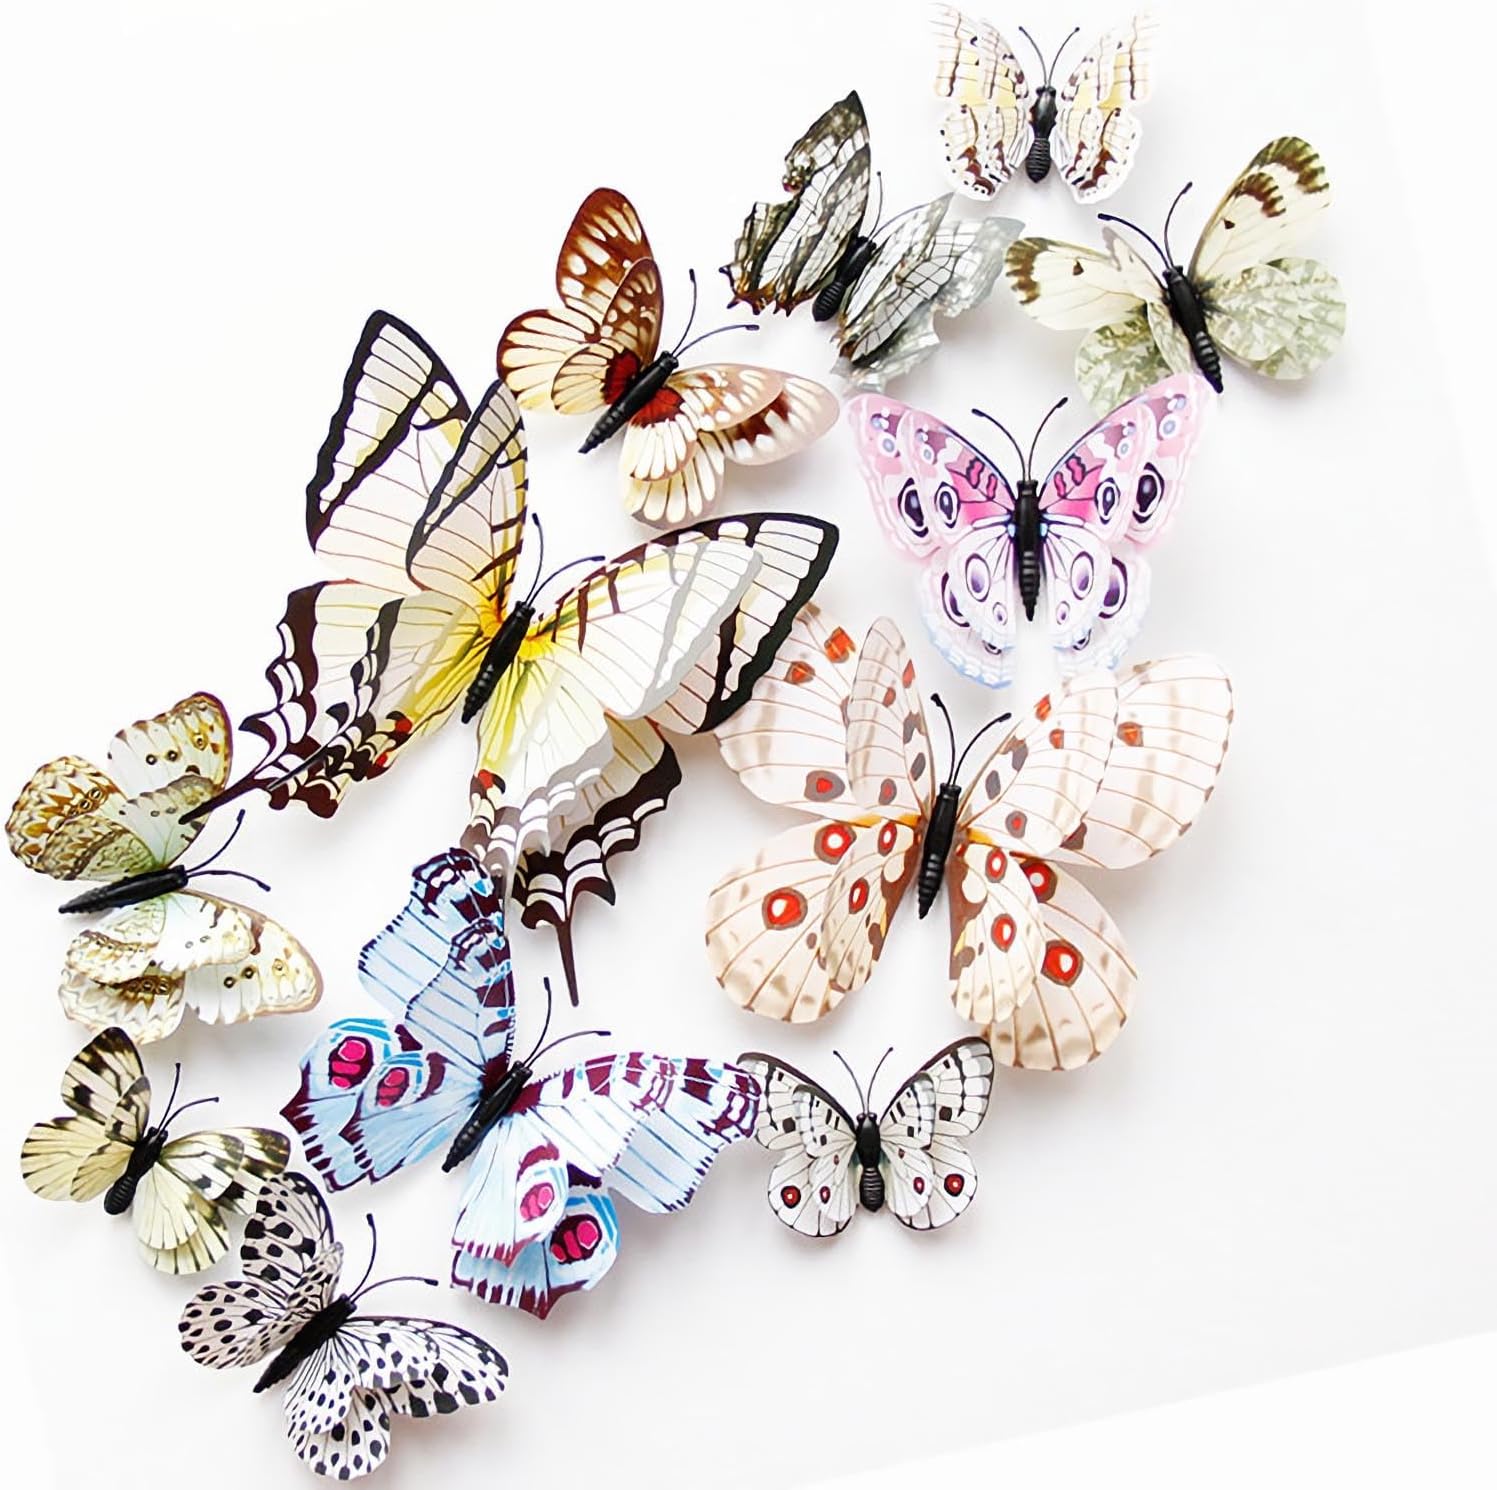 Bulk 24/48 Pcs 3D Butterfly Wall Decor Featuring Magnets, Perfect for Party Decorations Wholesale